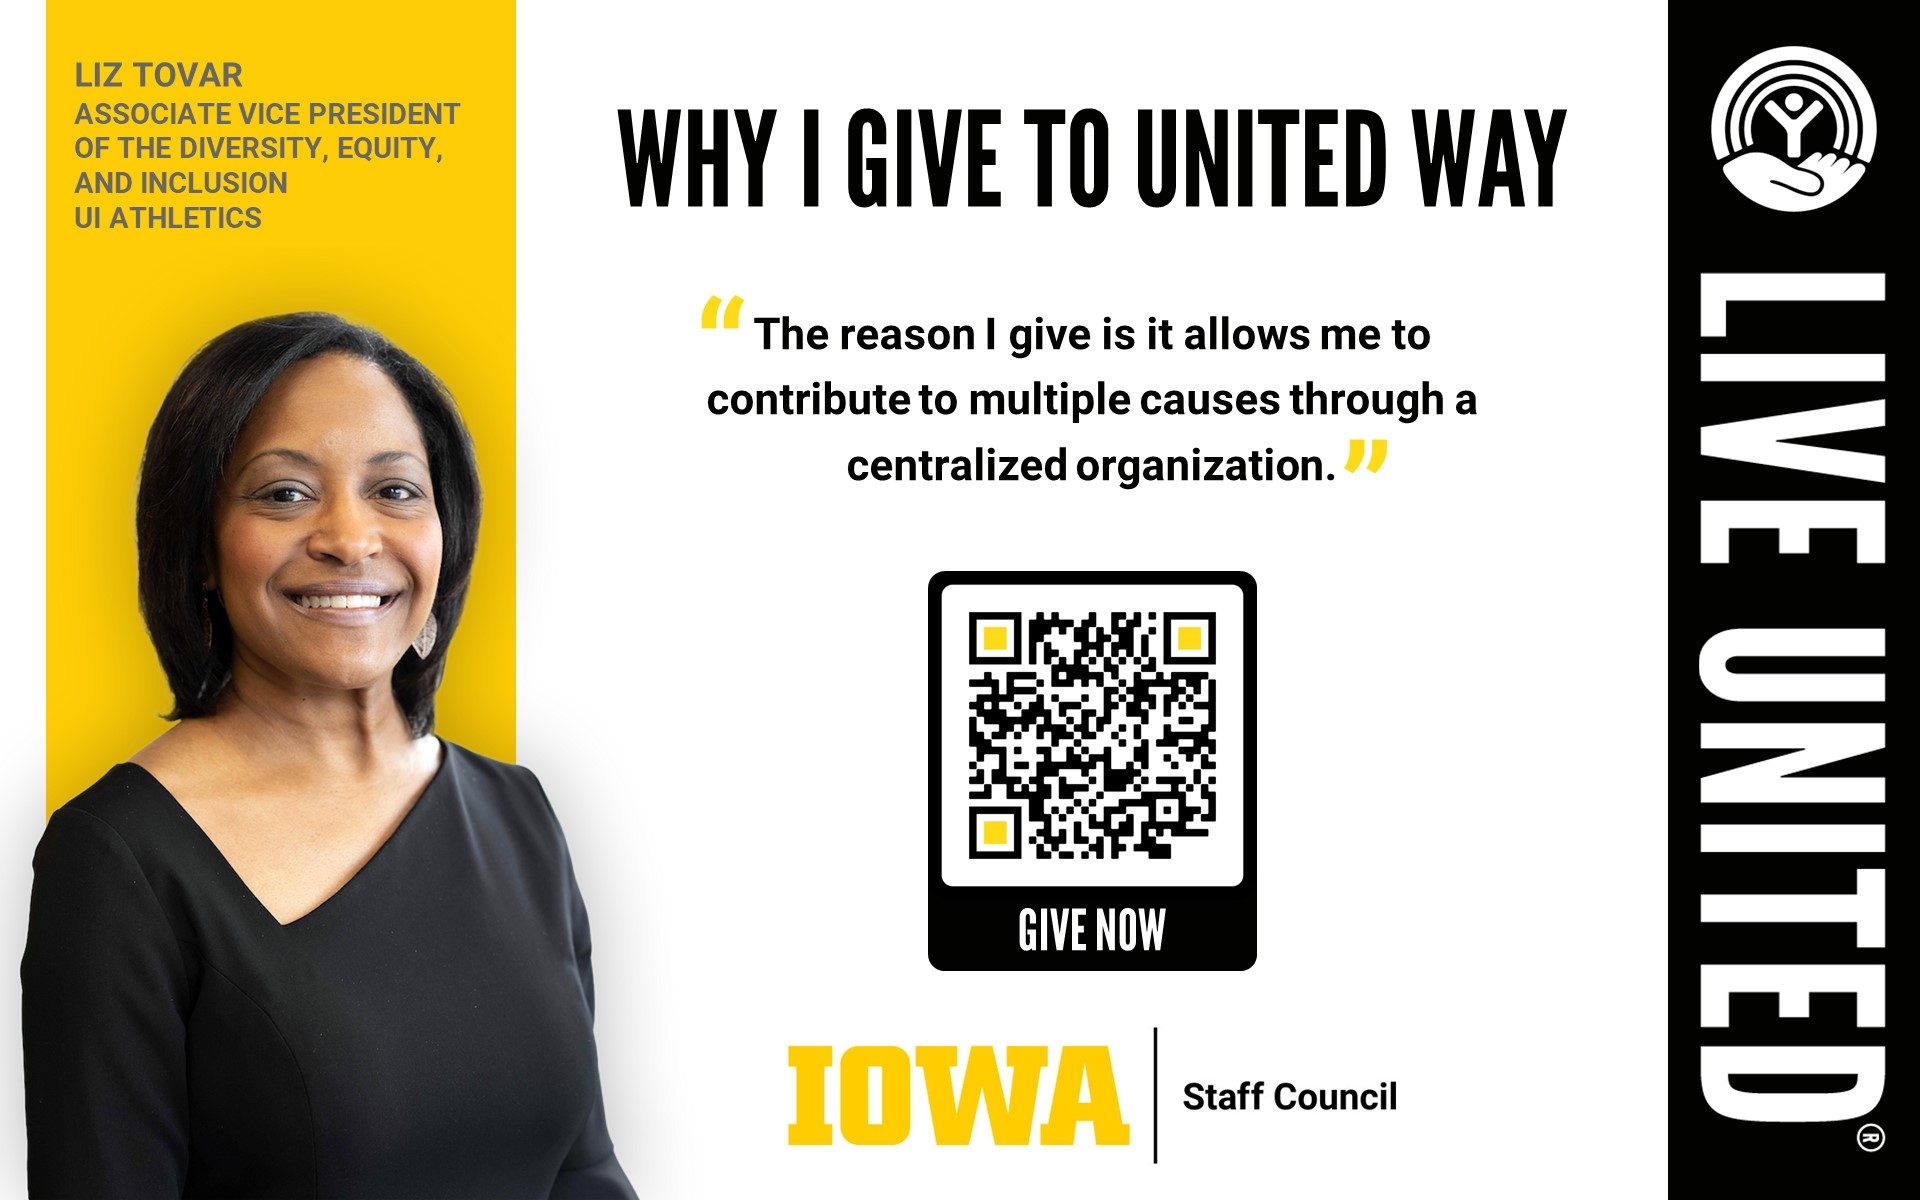 Give to united way